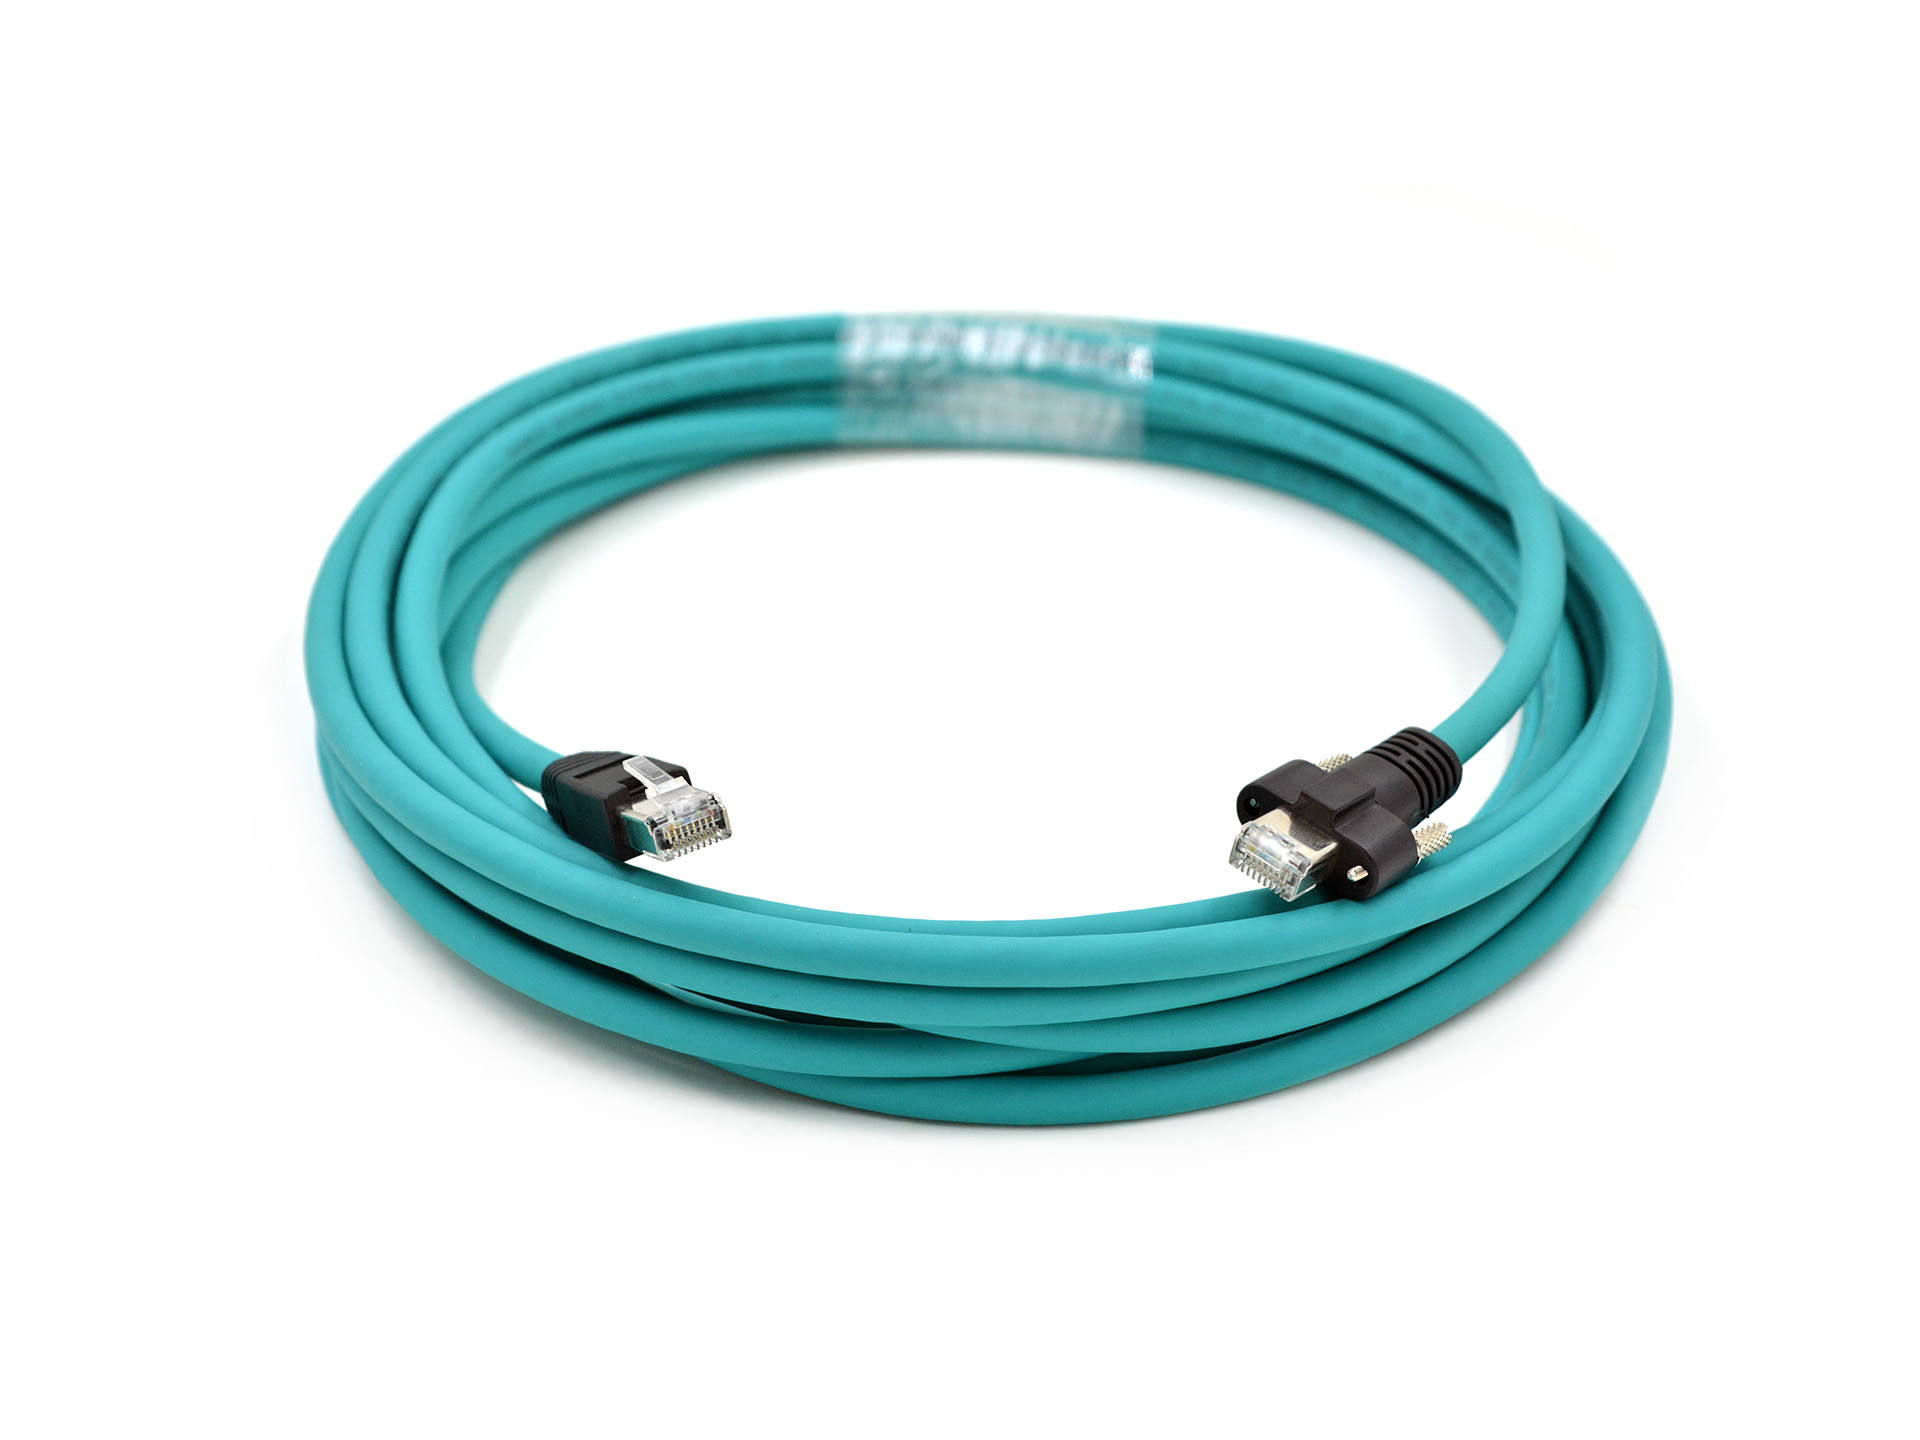 GigE vision 10g cable with RJ45 locking screws